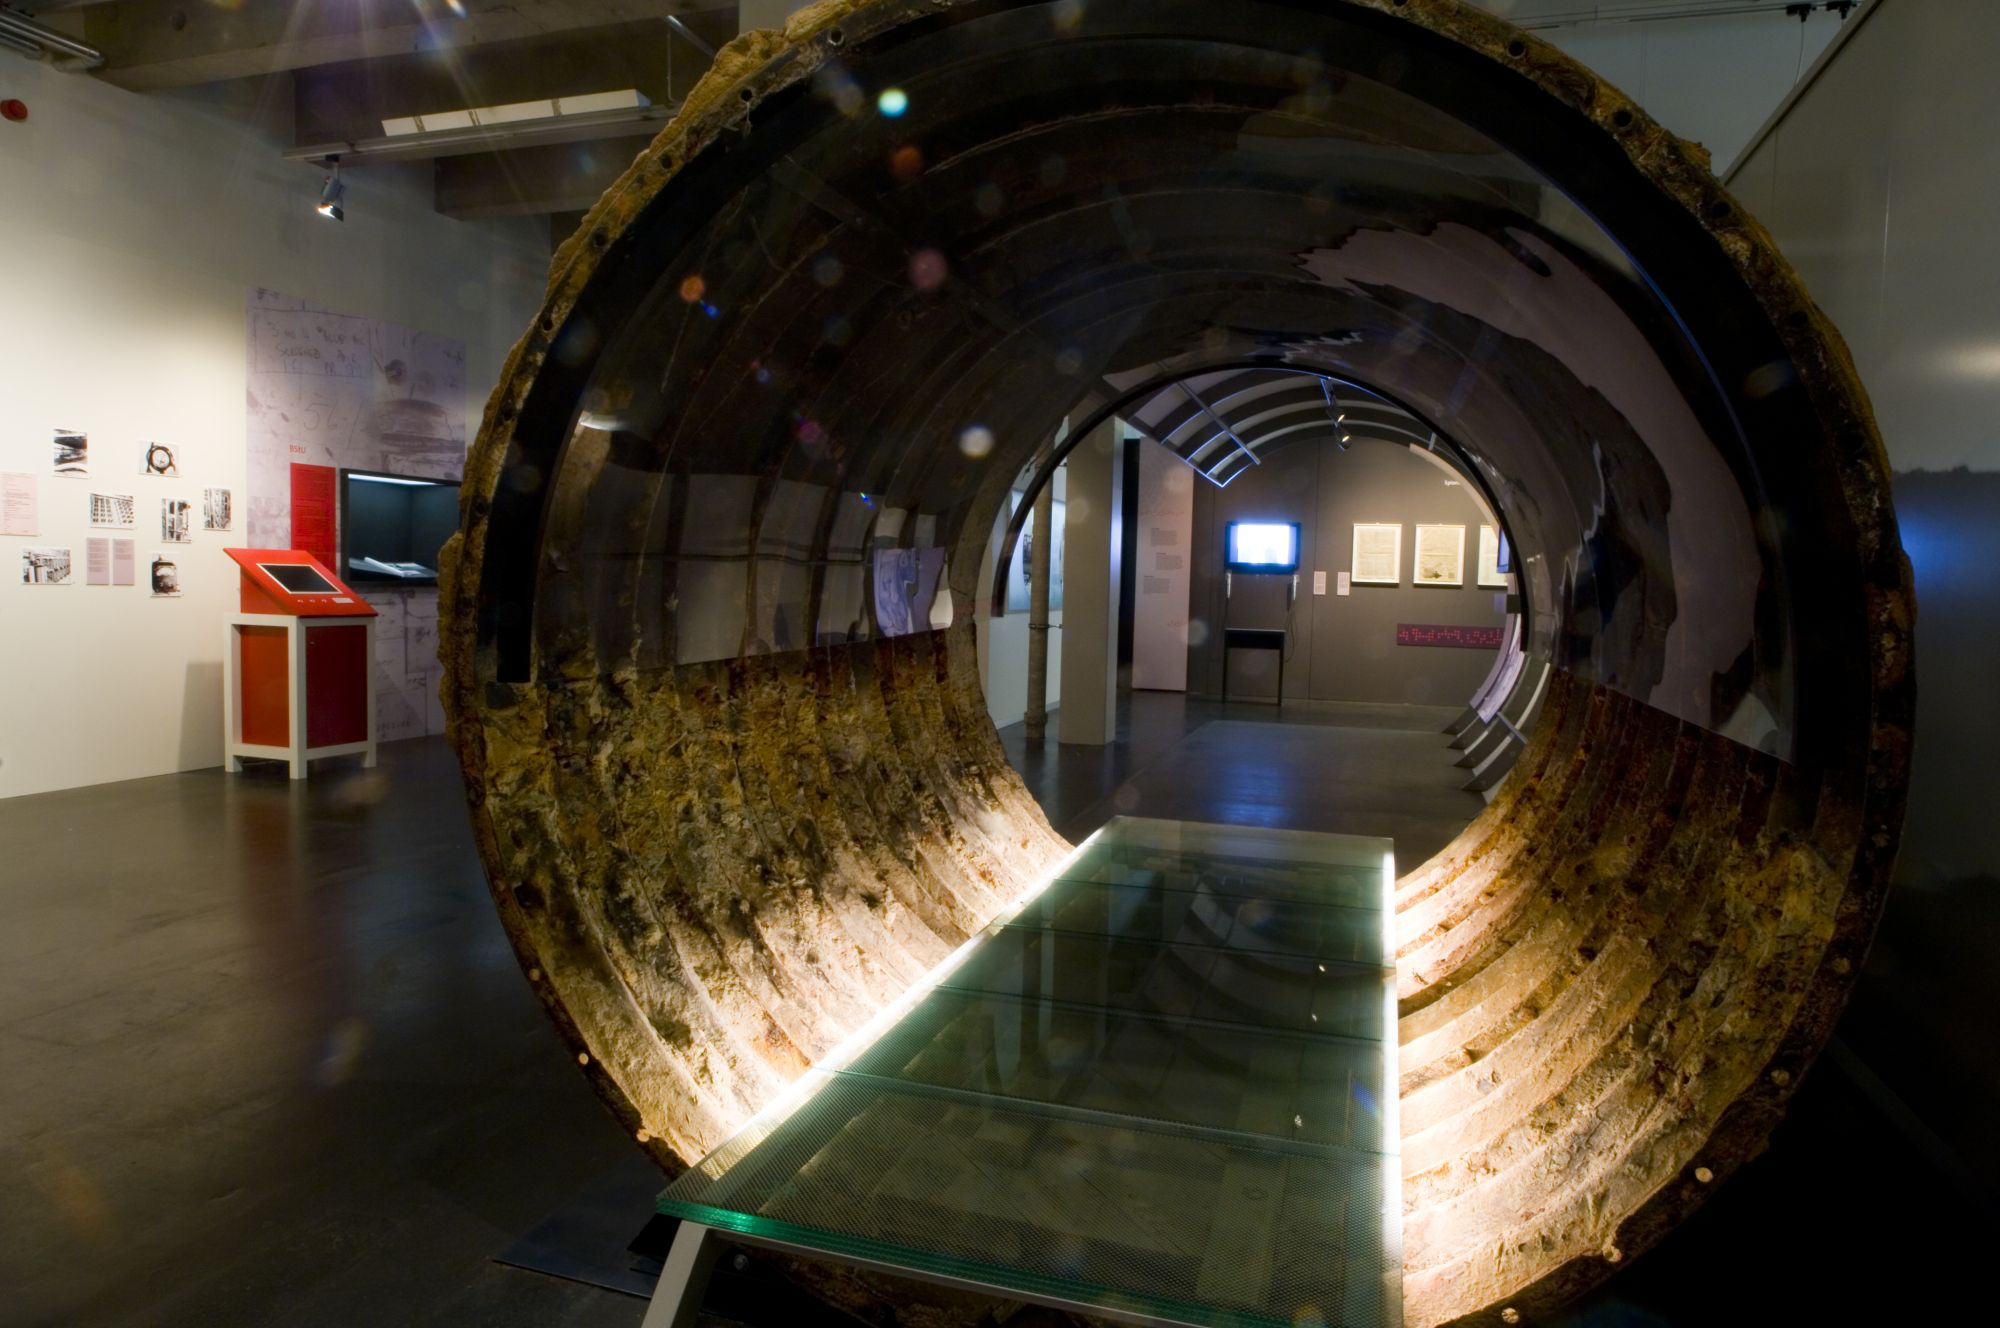 Special Exhibition on the Berlin Espionage Tunnel